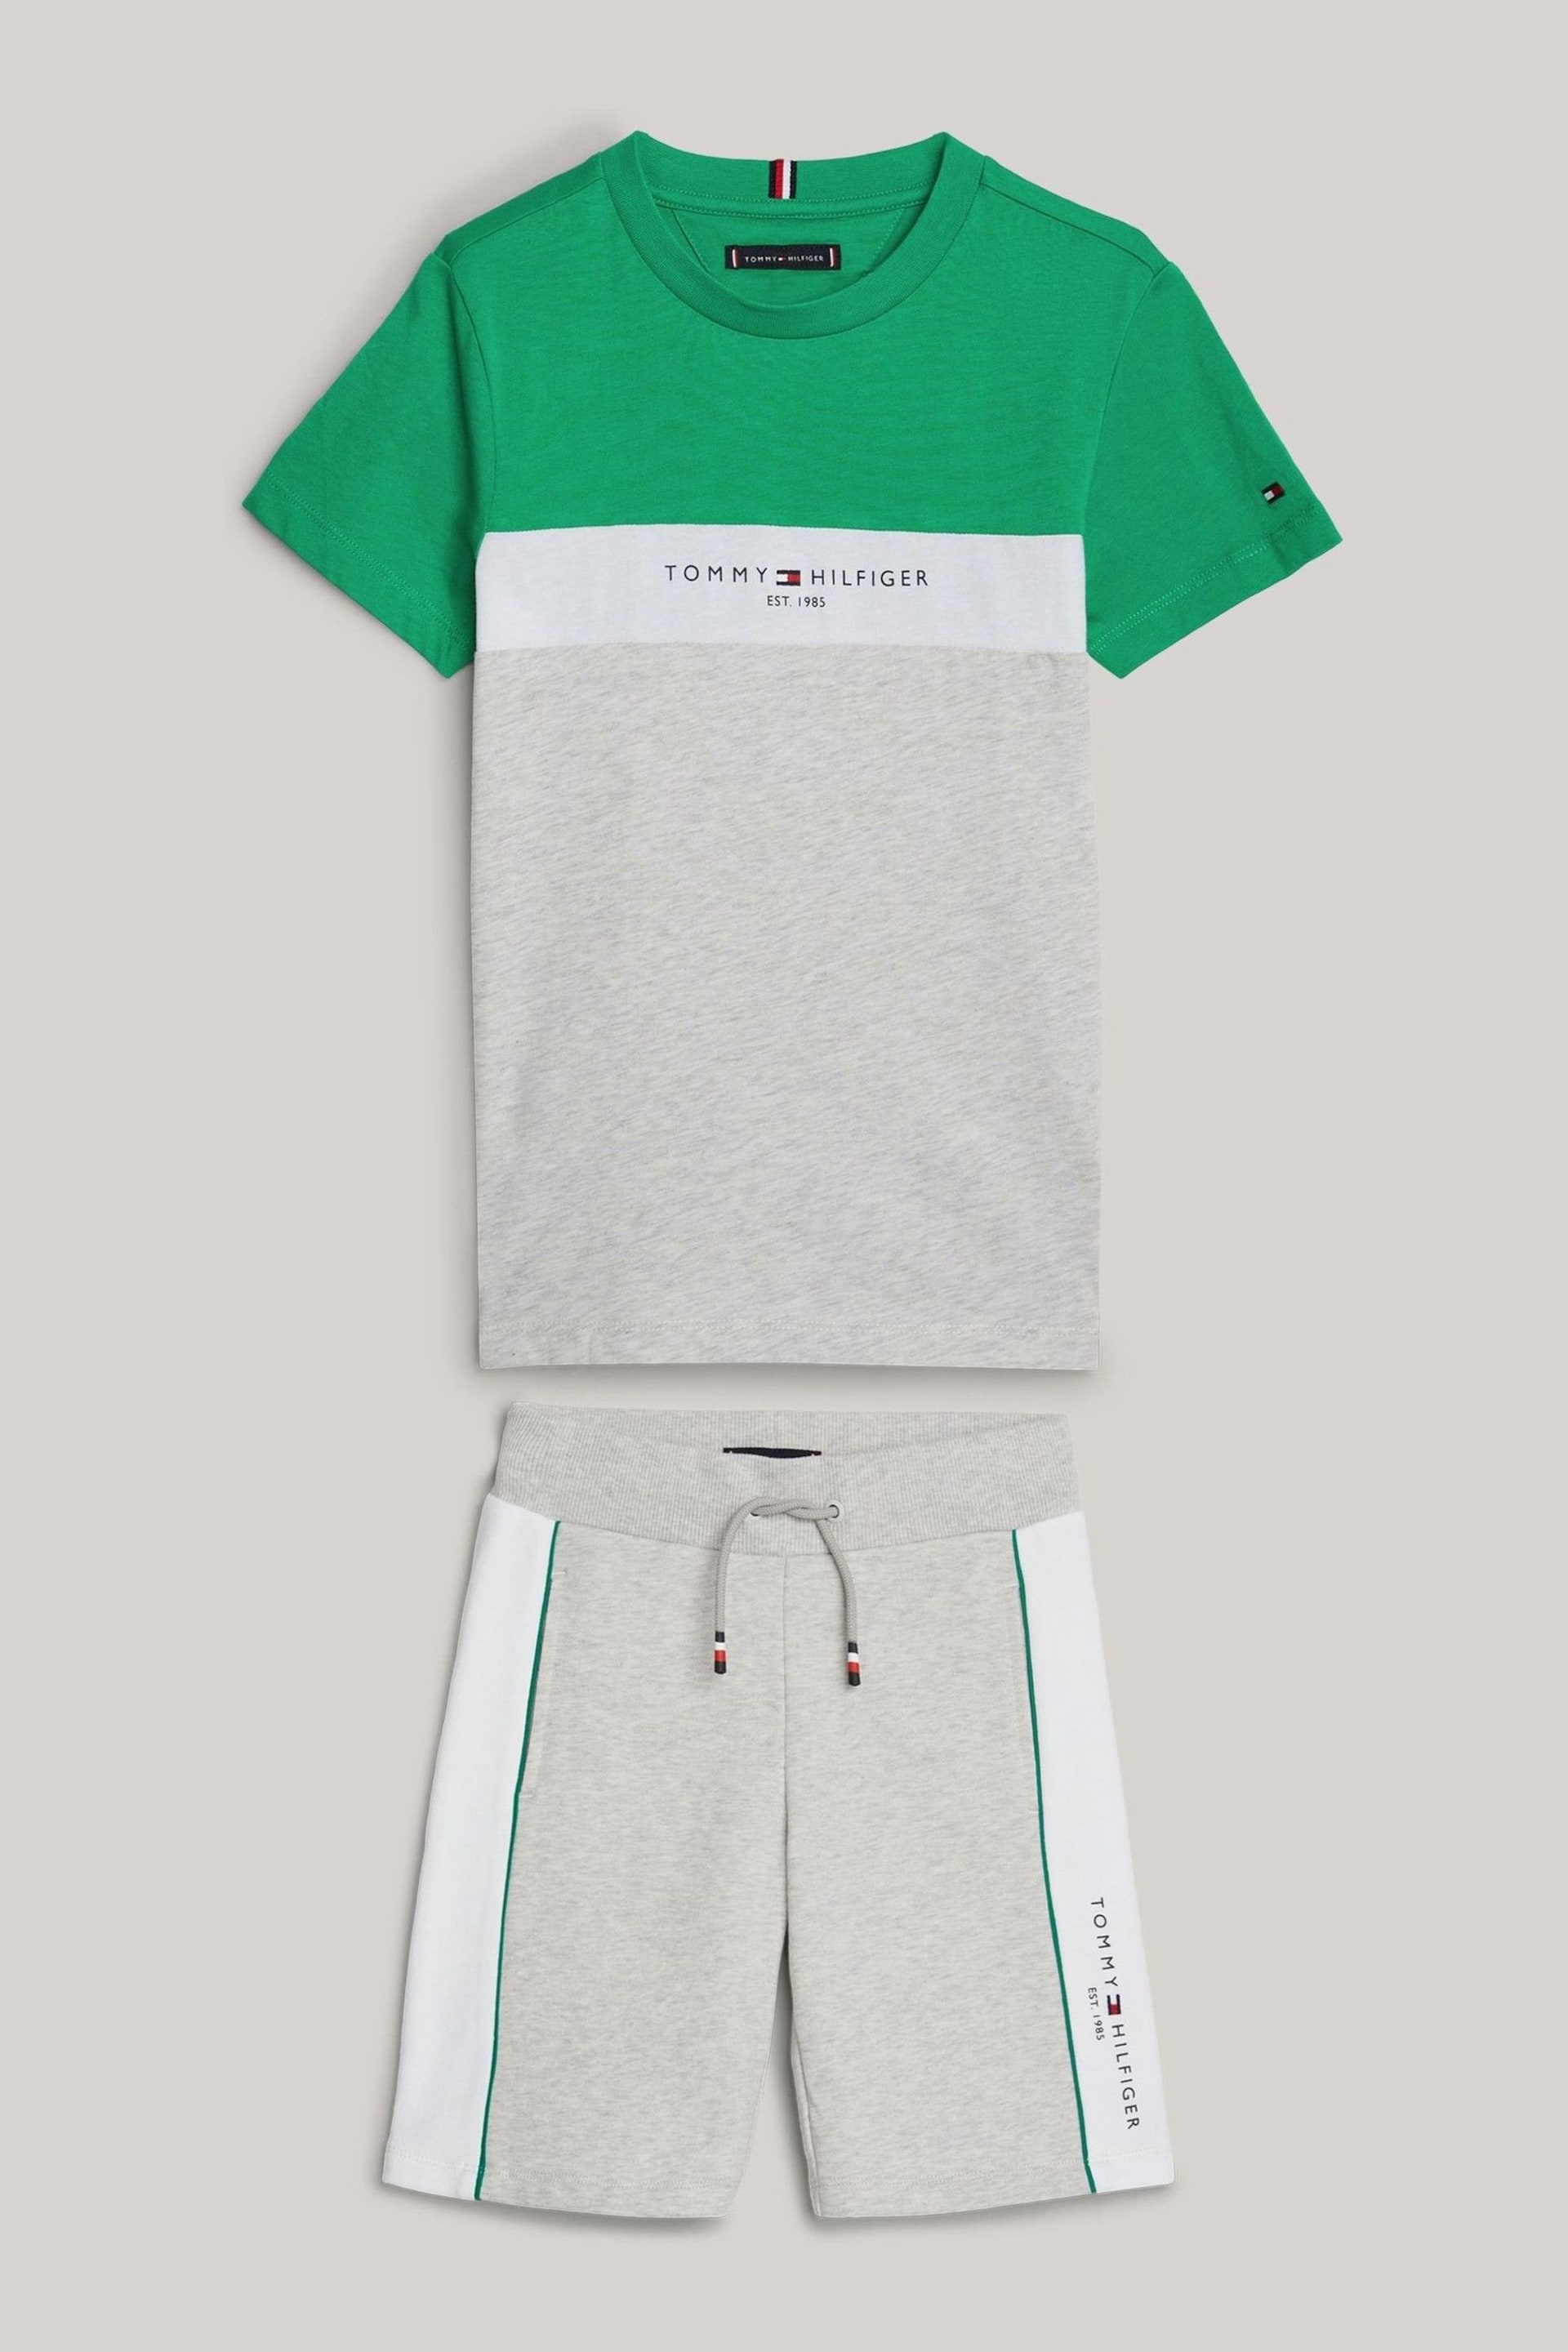 Tommy Hilfiger Green Essential Colorblock Shorts Set - Image 5 of 5